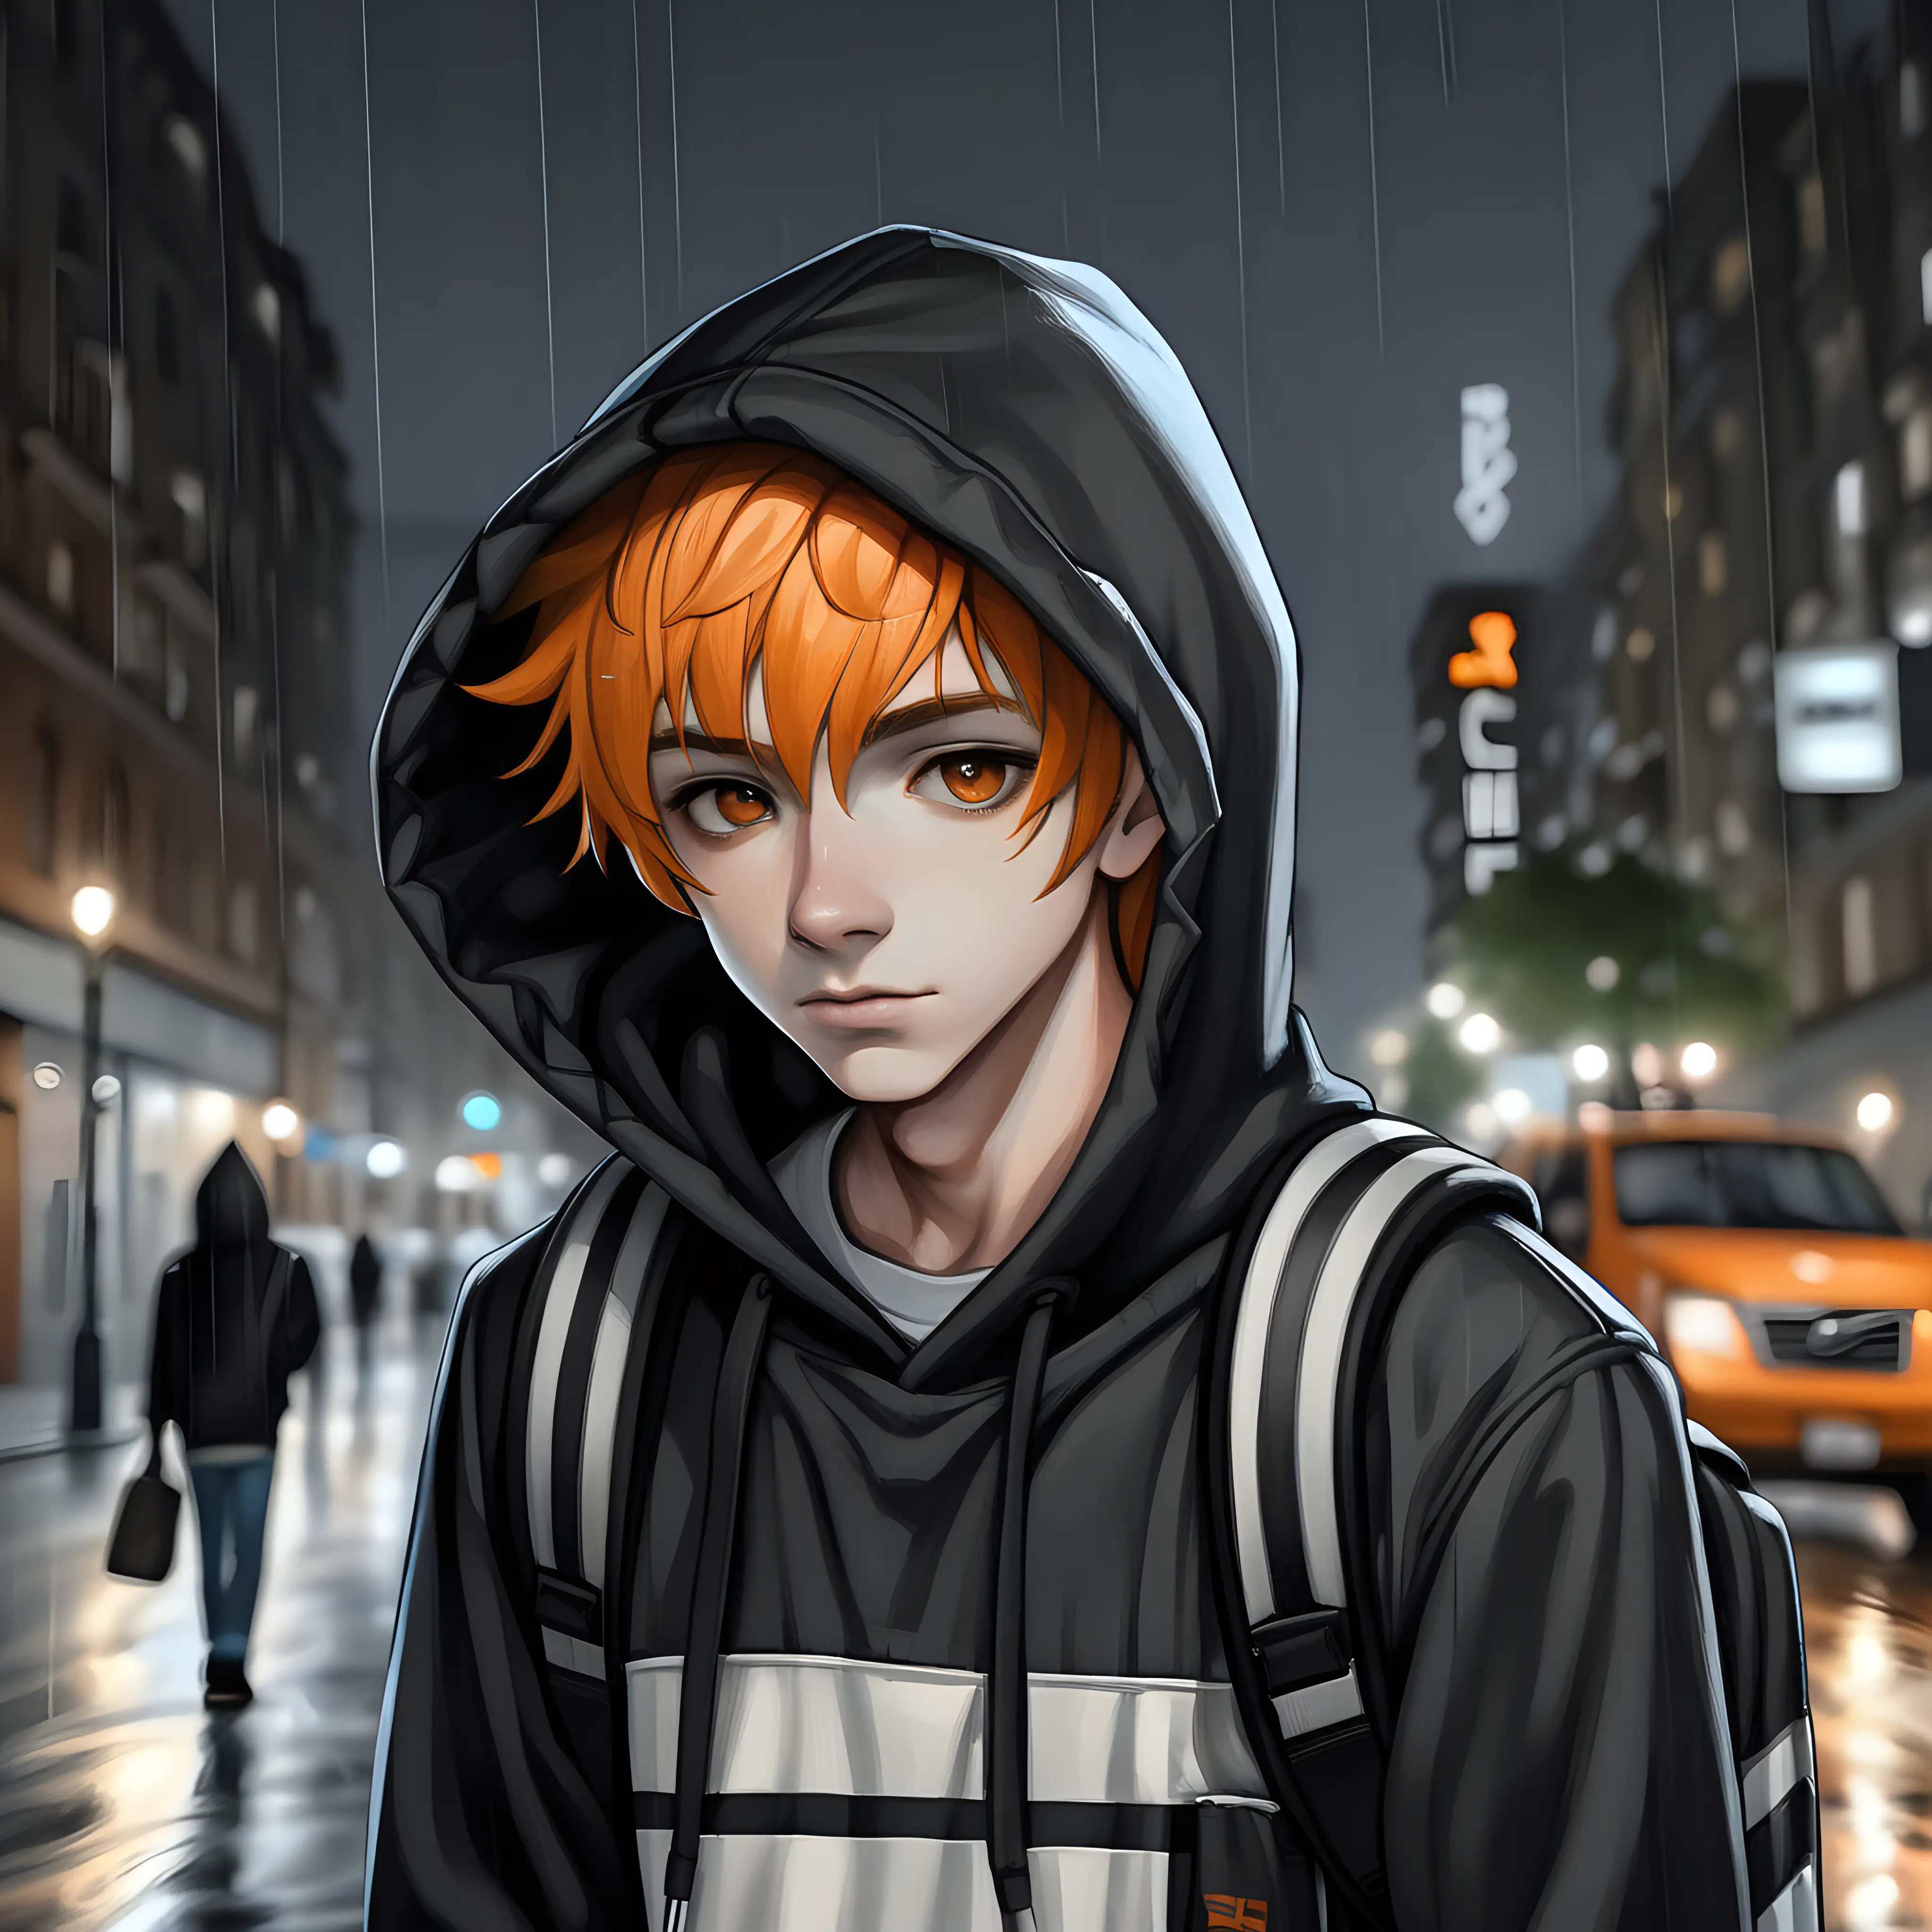 hooded teenager with pale orange hair and dark brown eyes in the city at night in the rain walking with his hands in his pockets, black shirt and grey hood, wearing a black and white striped backpack